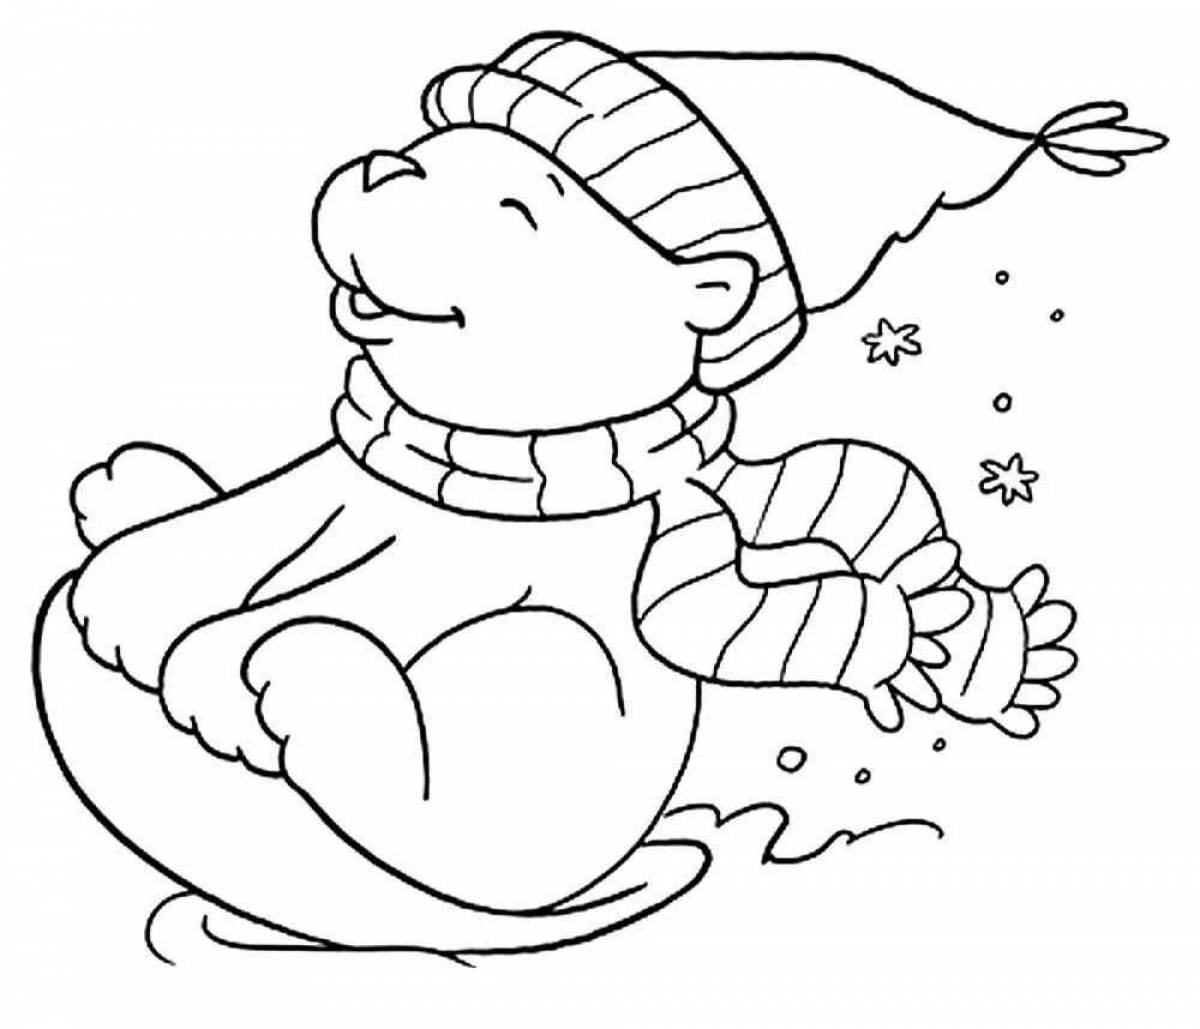 Coloring page holiday child on a sled